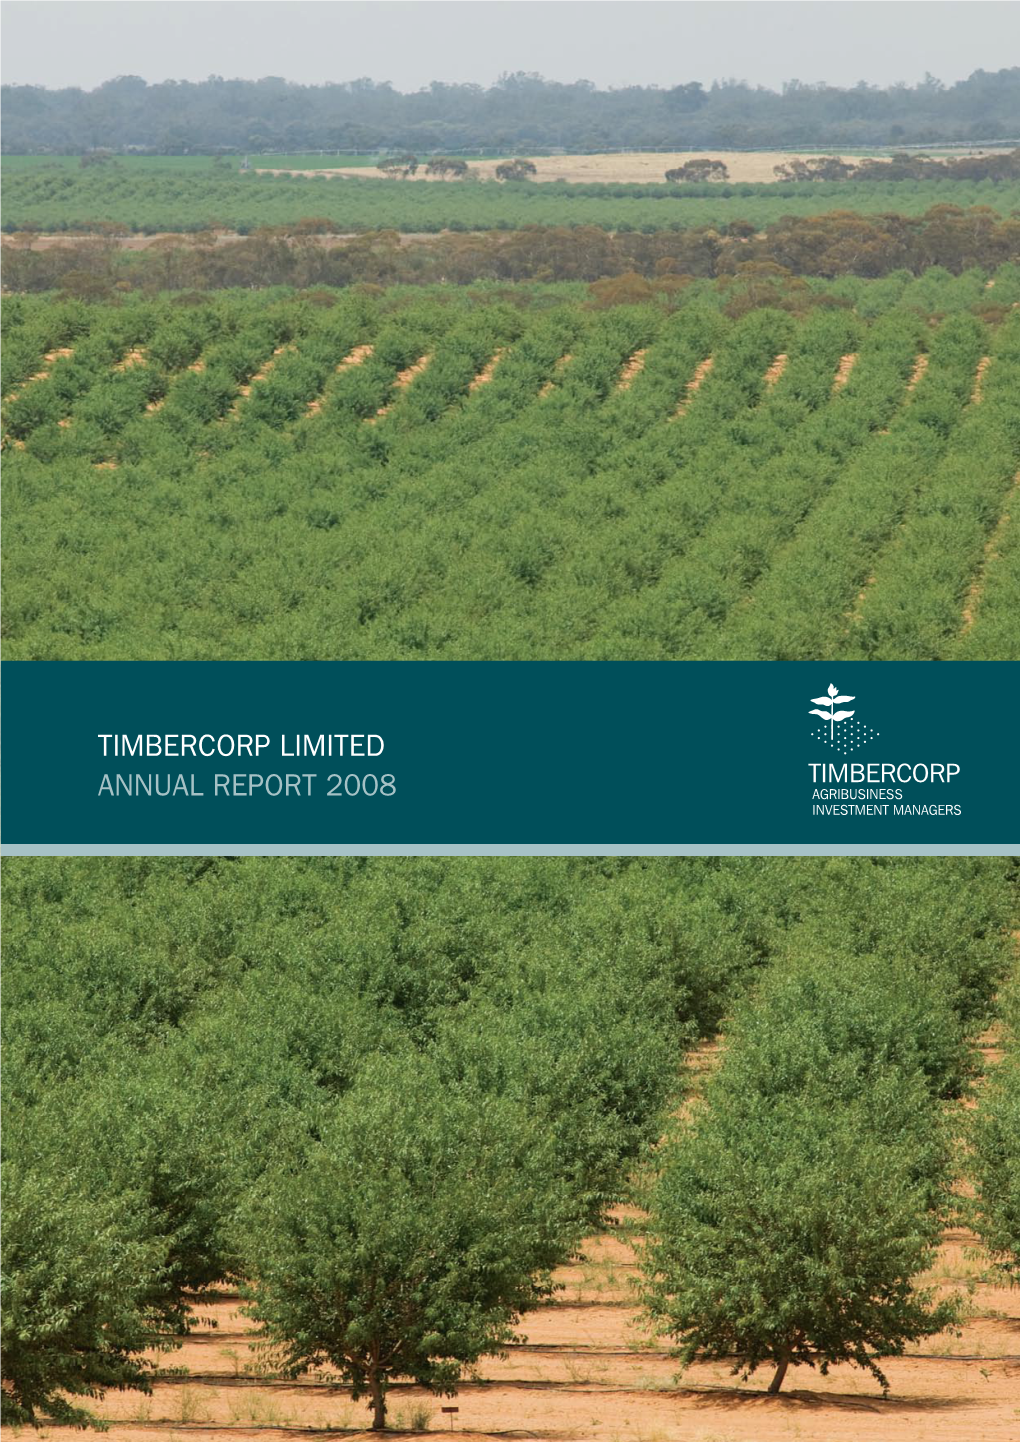 Timbercorp Limited Annual Report 2008 Contents